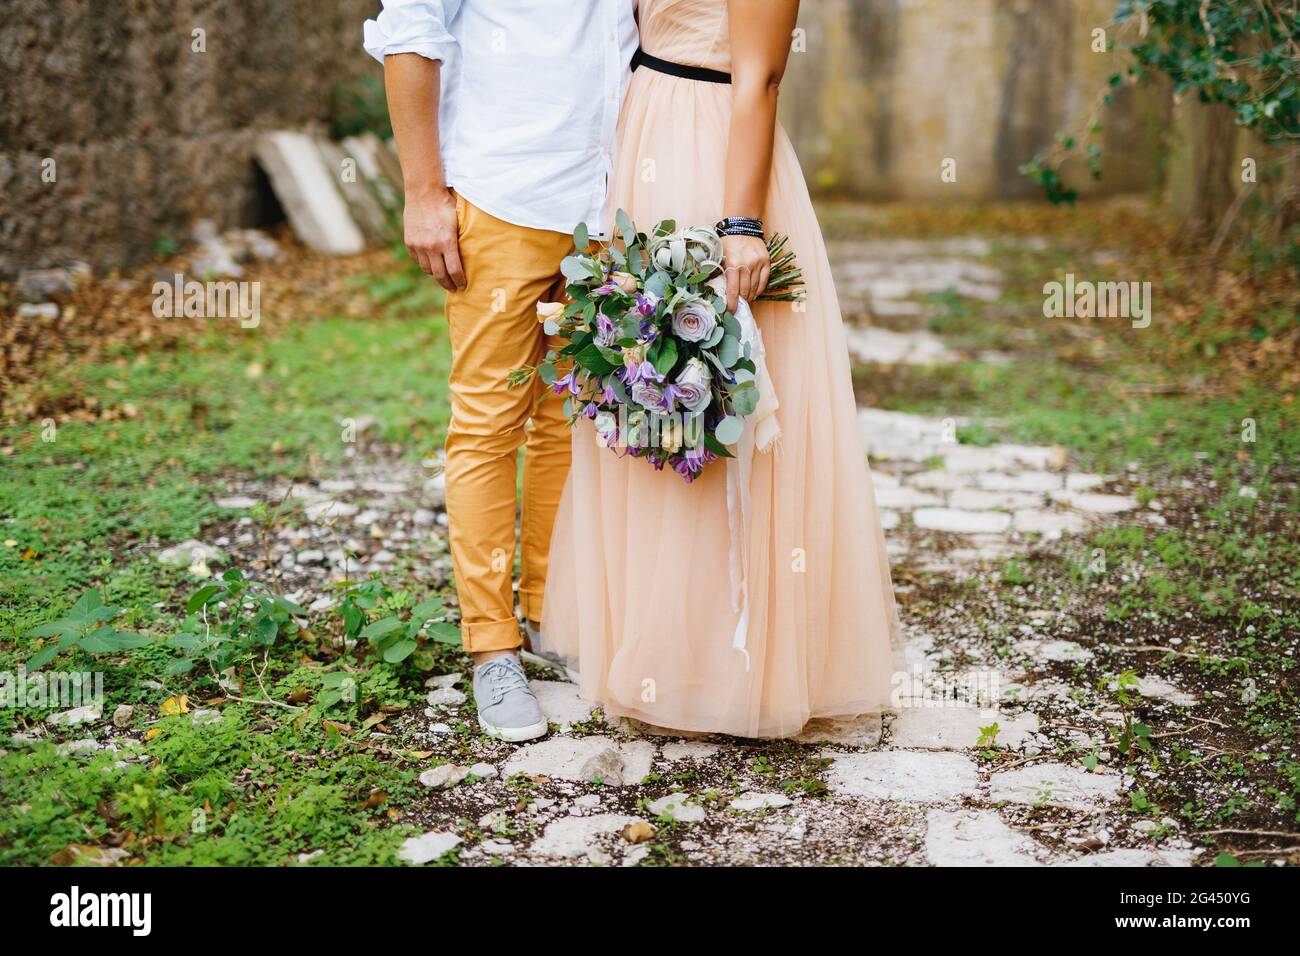 Half-portrait of groom embracing bride in a beautiful dress with a bouquet in her hands on the background of a stone wall Stock Photo